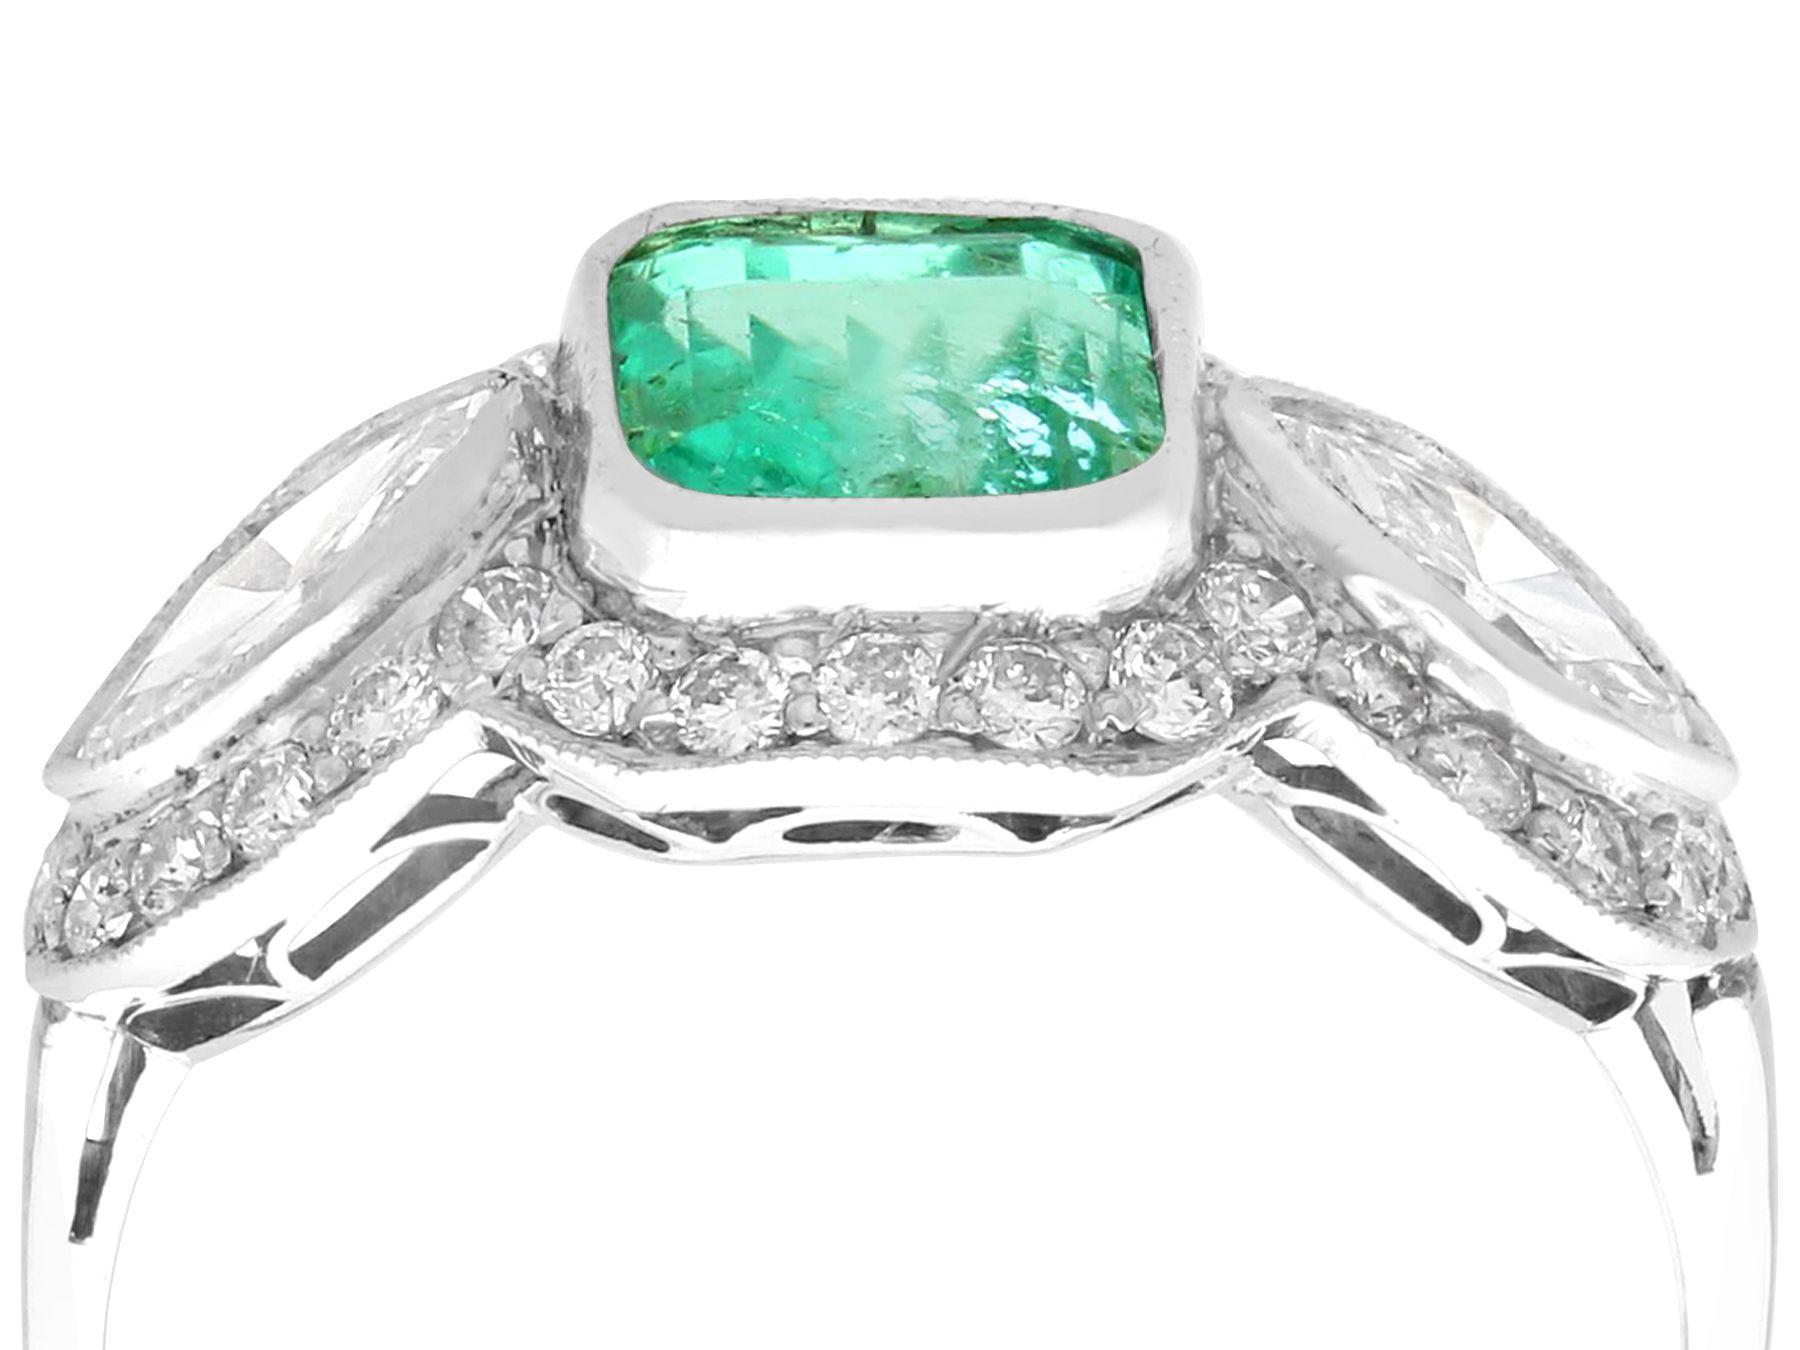 A stunning, fine and impressive antique 1.45 carat emerald and 1.43 carat diamond, platinum dress ring; part of our diverse antique jewelry collections

This stunning, fine and impressive antique emerald and diamond ring has been crafted in